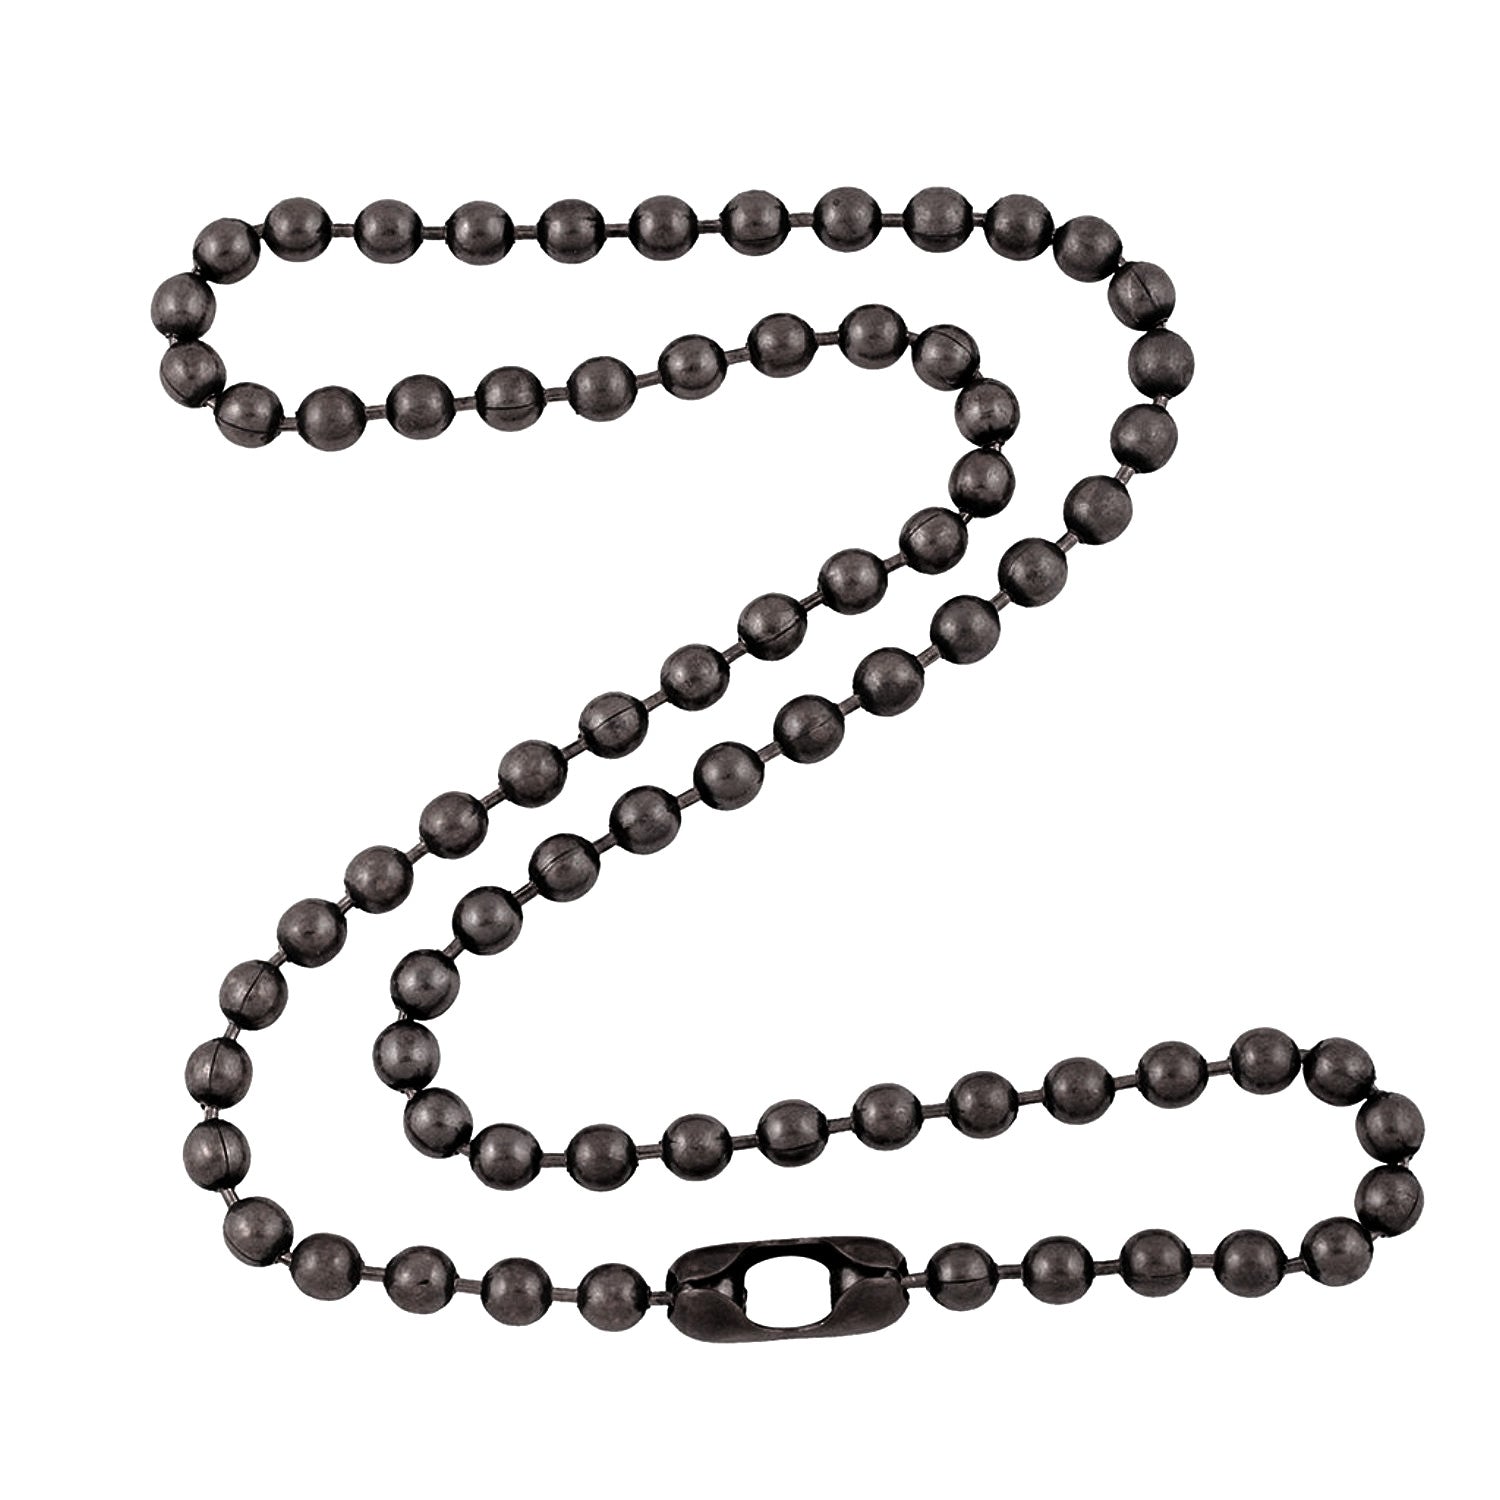 4.8mm Large Gunmetal Steel Ball Chain Necklace with Extra Durable Colo